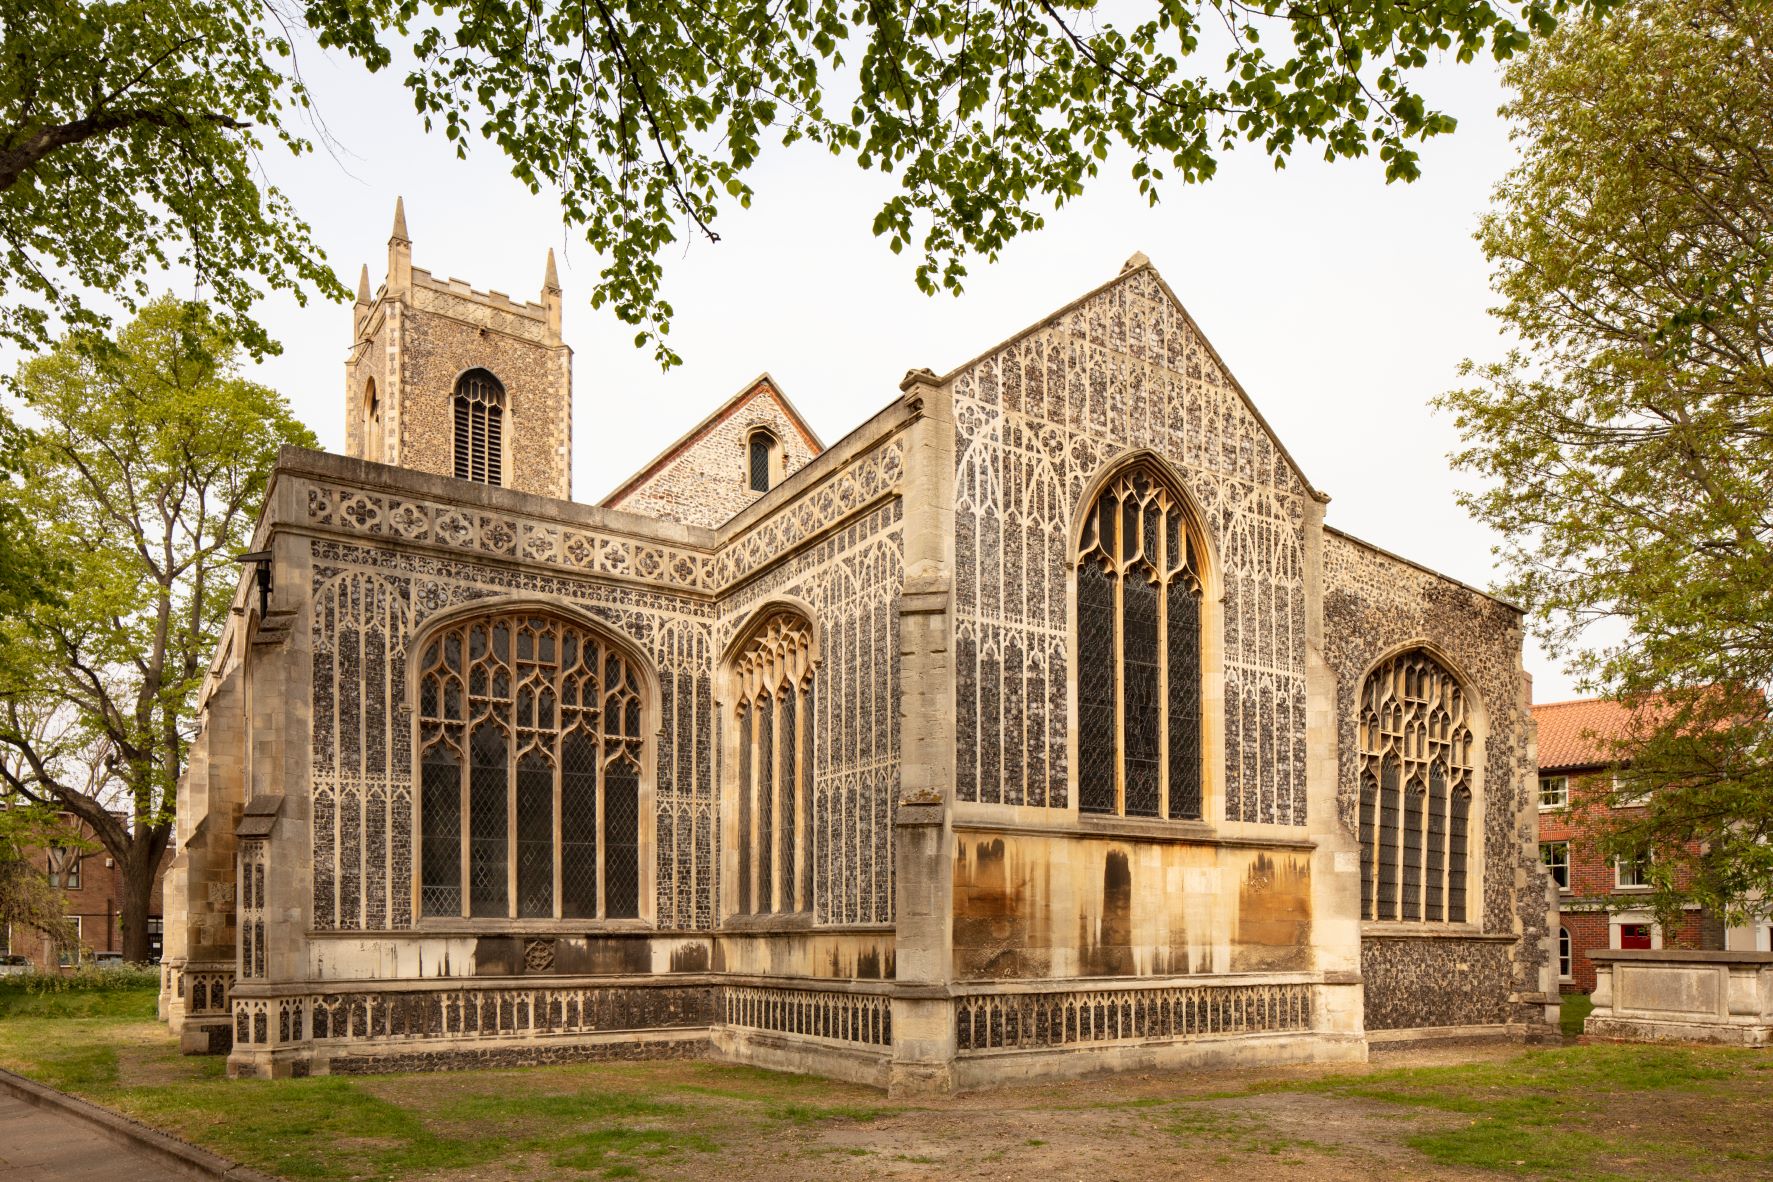 the image shows the front of the church, with its ornate brickwork and large arched windows. The church tower can be seen behind.